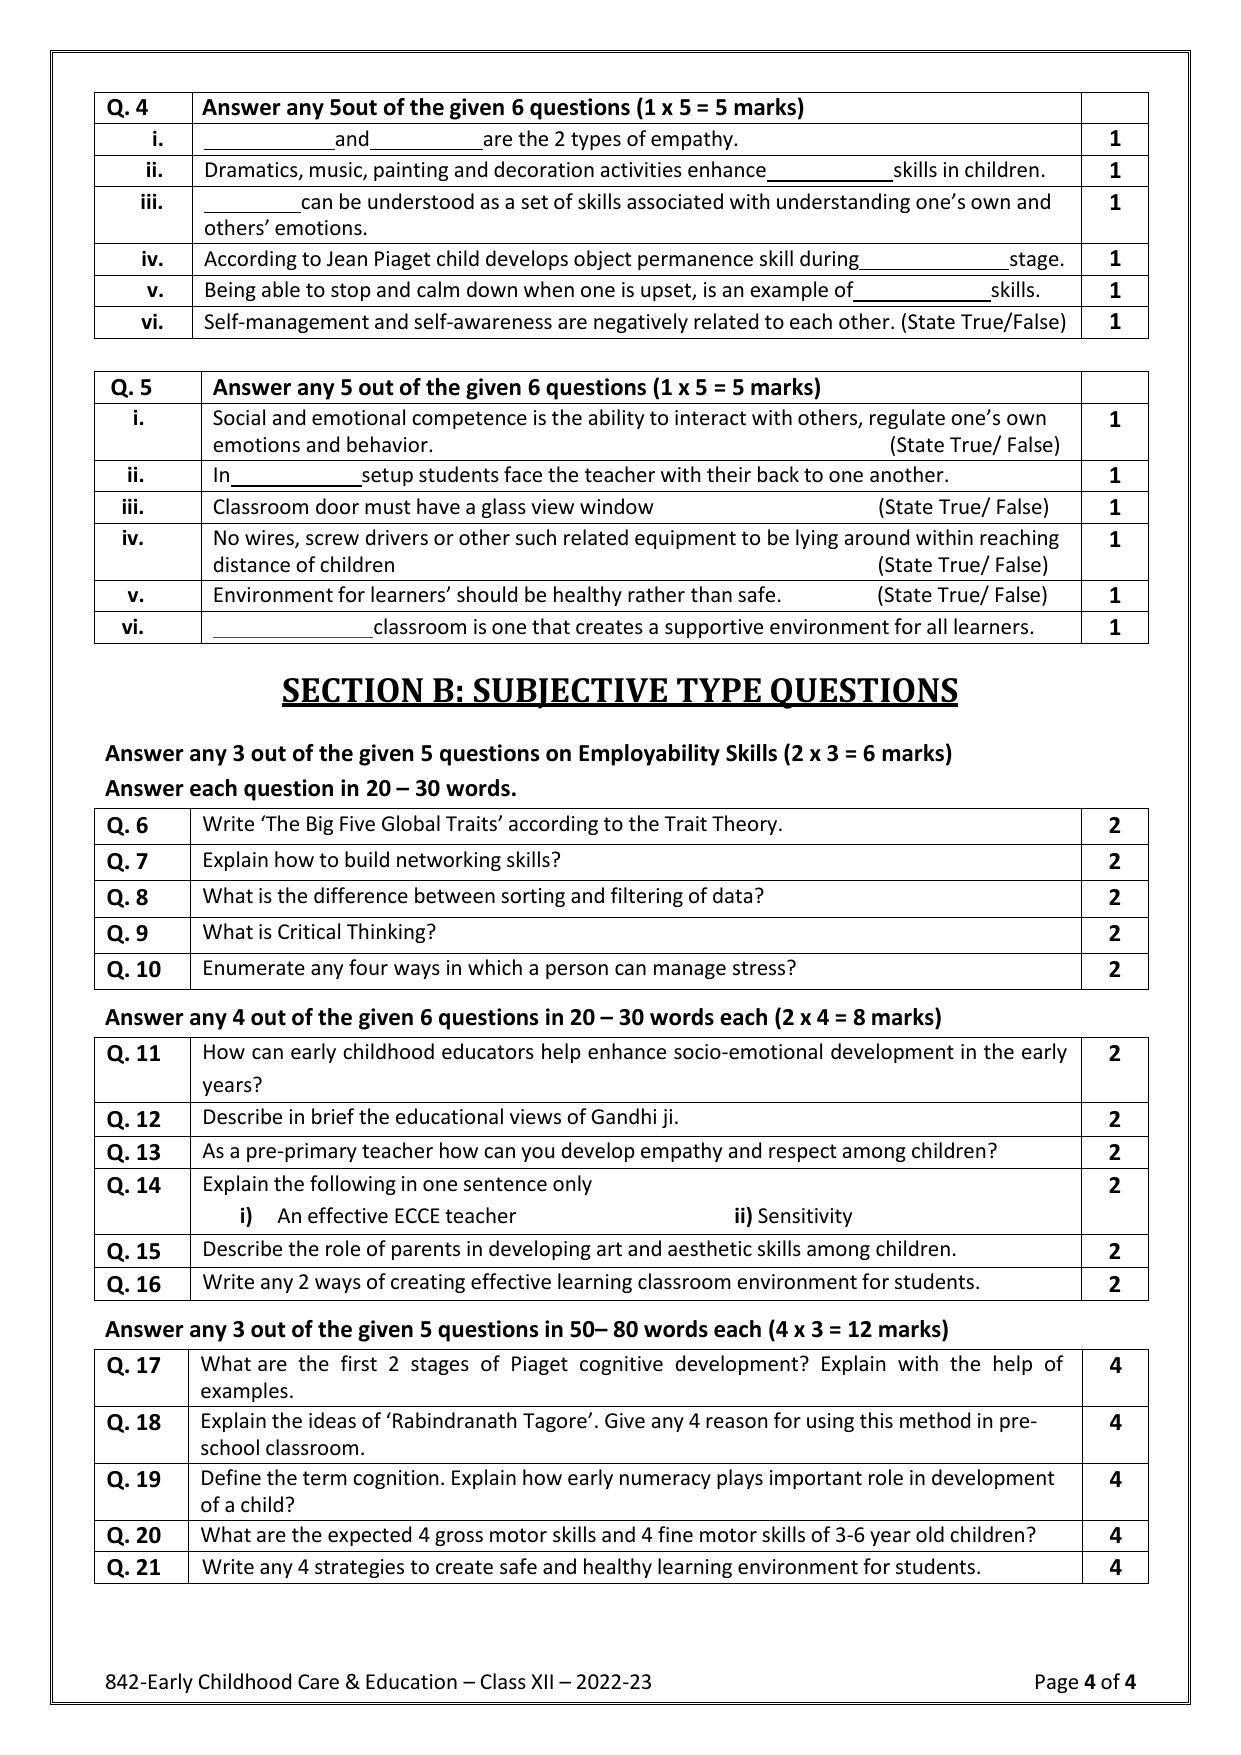 CBSE Class 12 Early Childhood Care & Education (Skill Education) Sample Papers 2023 - Page 4